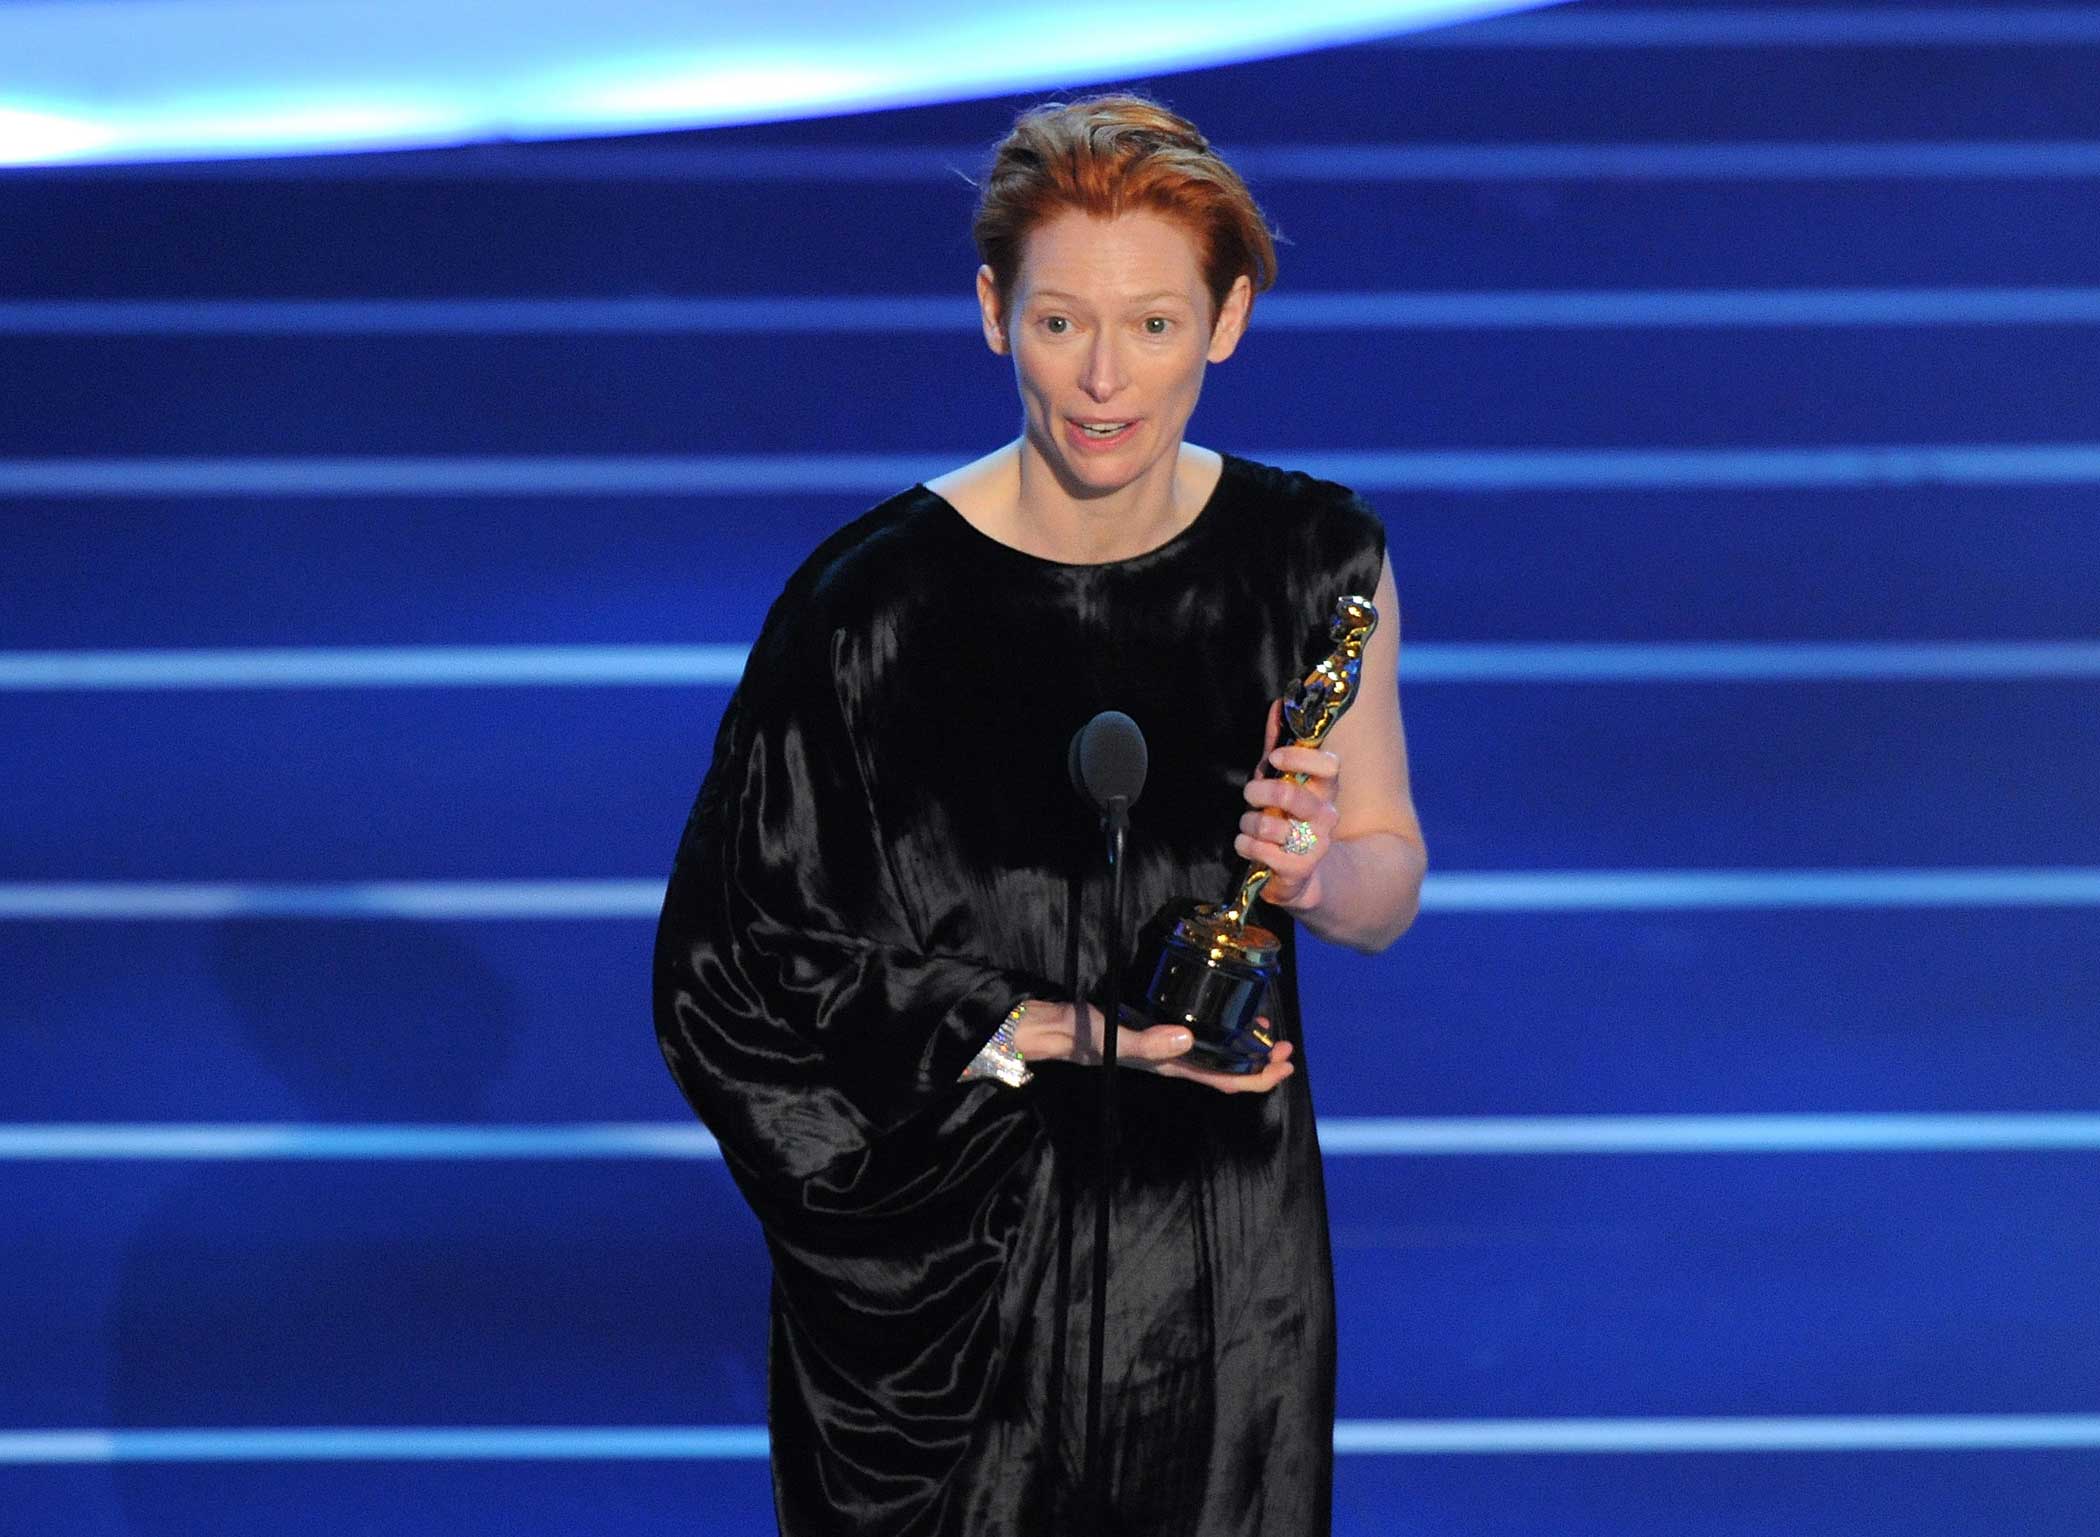 Tilda Swinton is pictured onstage during the 80th Annual Academy Awards on Feb. 24, 2008 in Los Angeles.